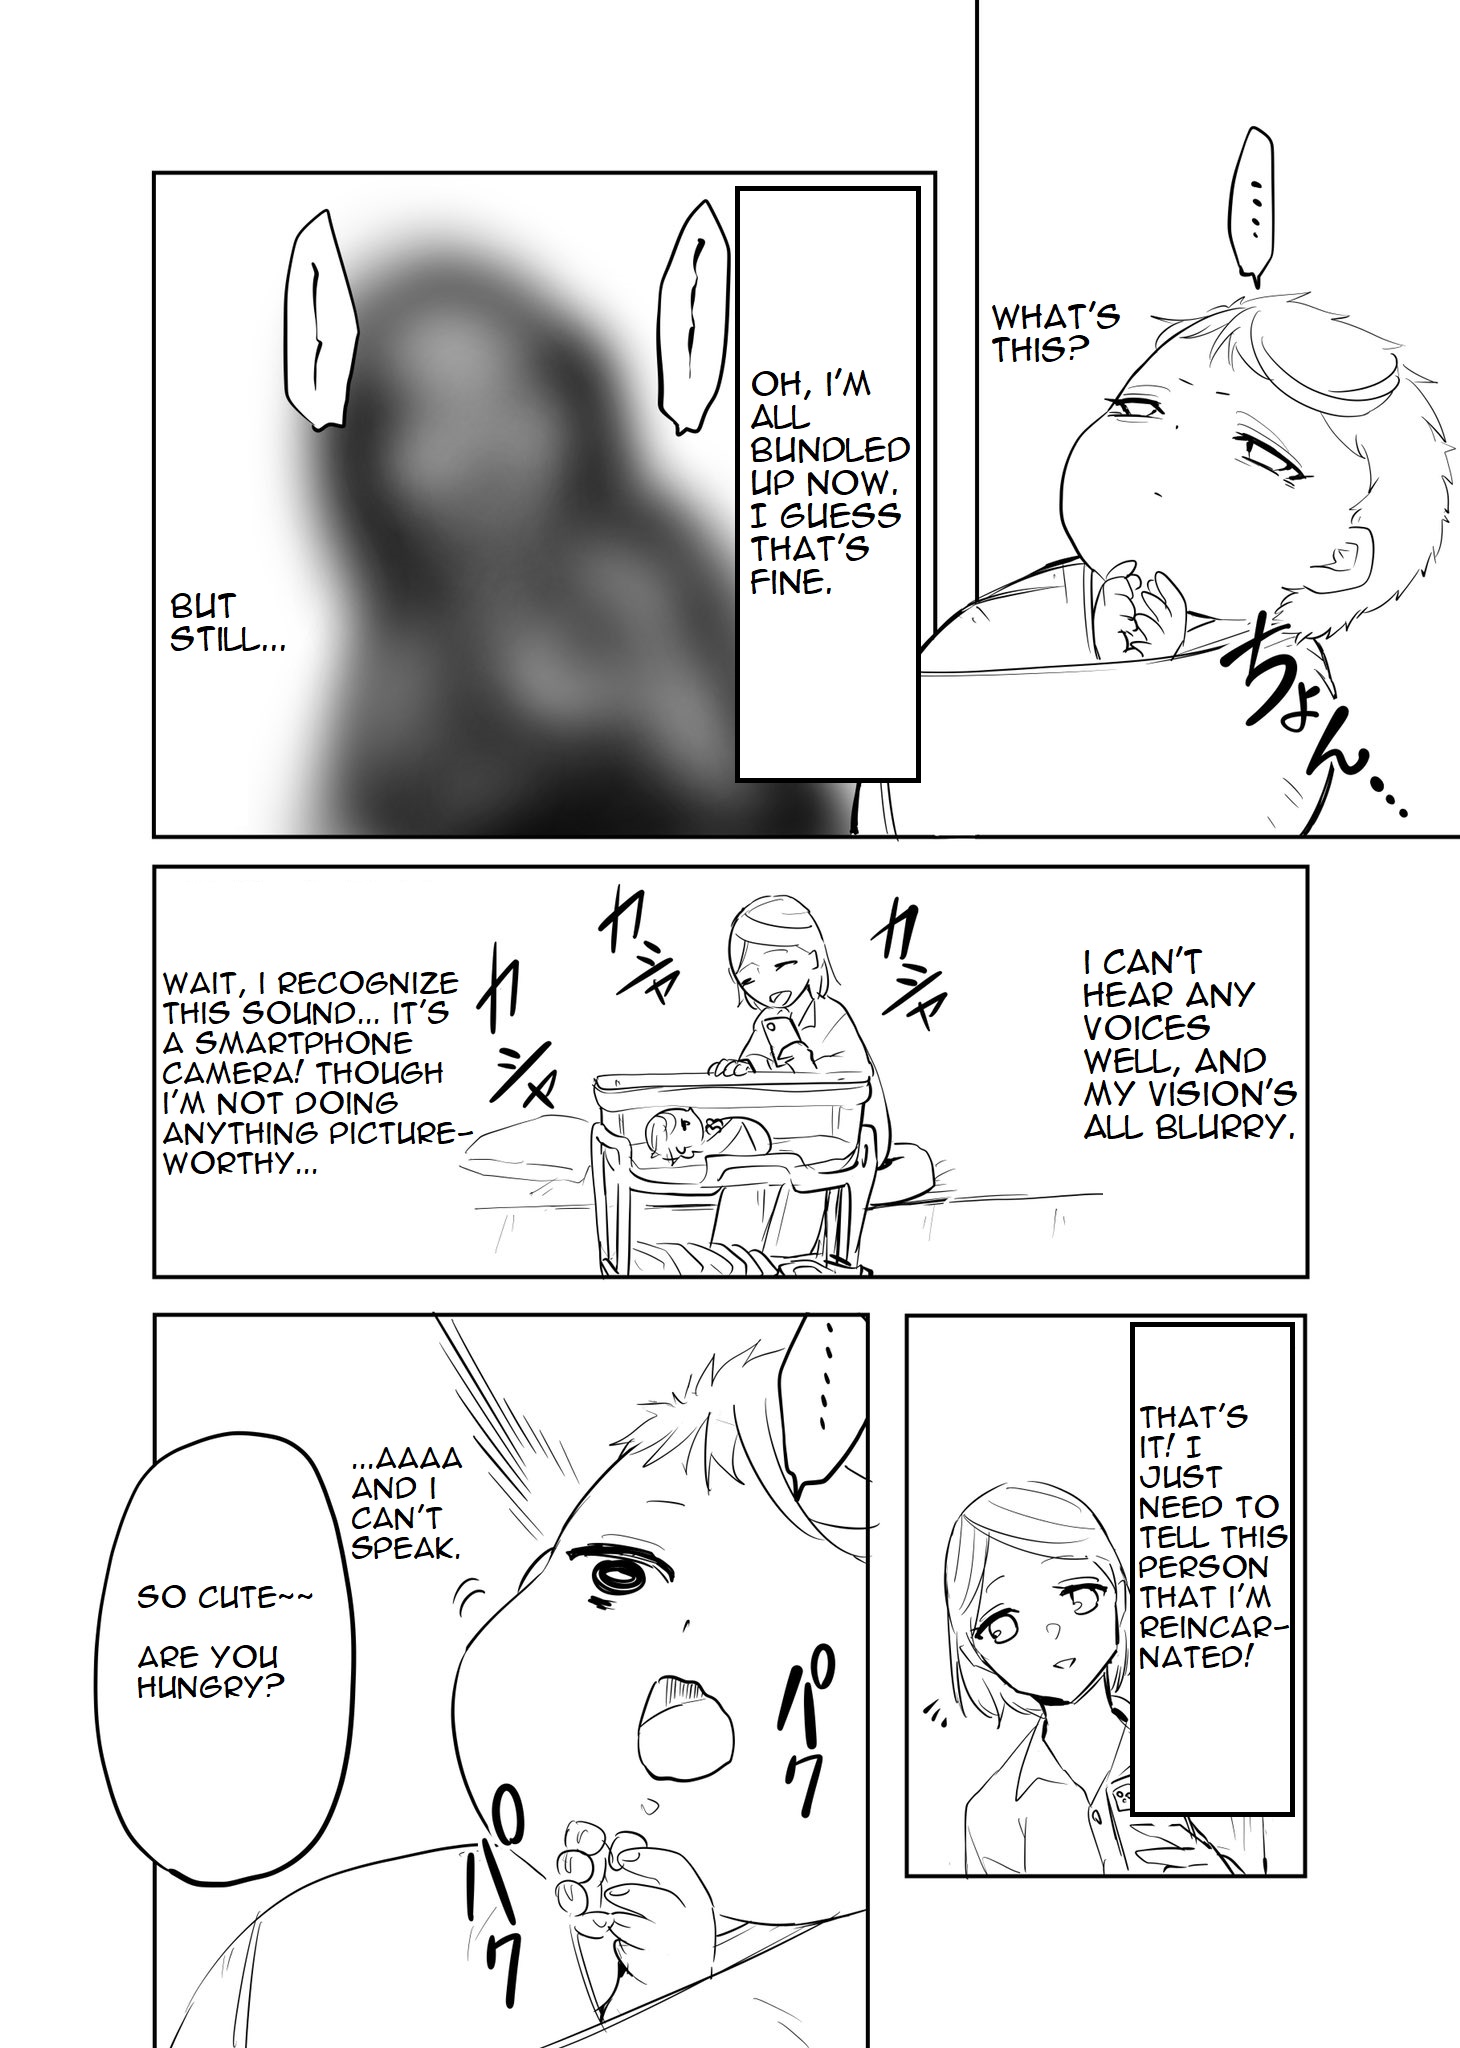 A Story About Being Reborn As A Baby (Pre-Serialization) - Page 2